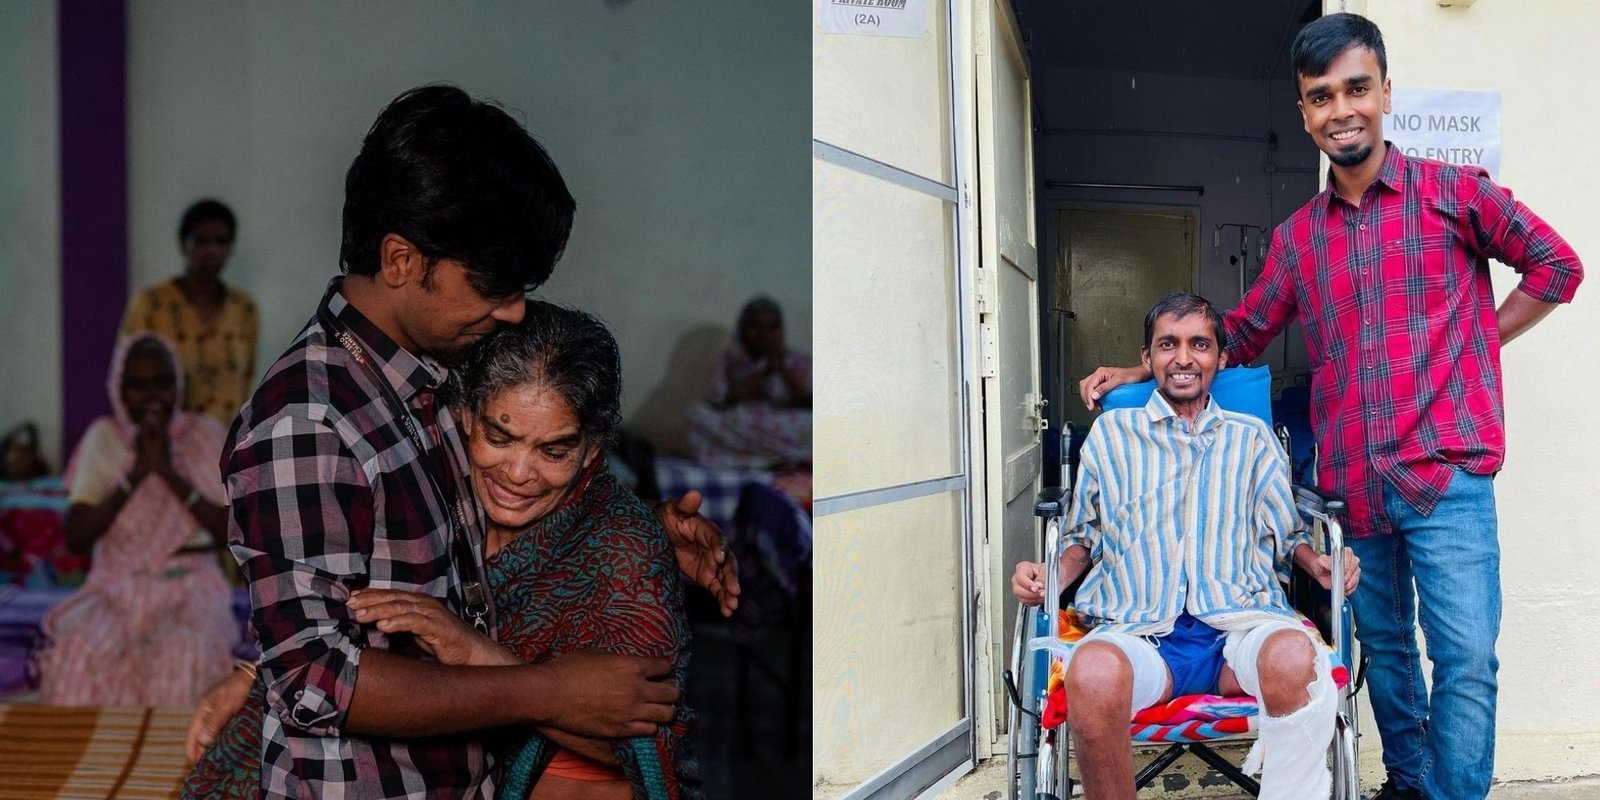 Jasper Paul From Hyderabad Has Helped Over 2,000 People By Rehabilitating The Destitute